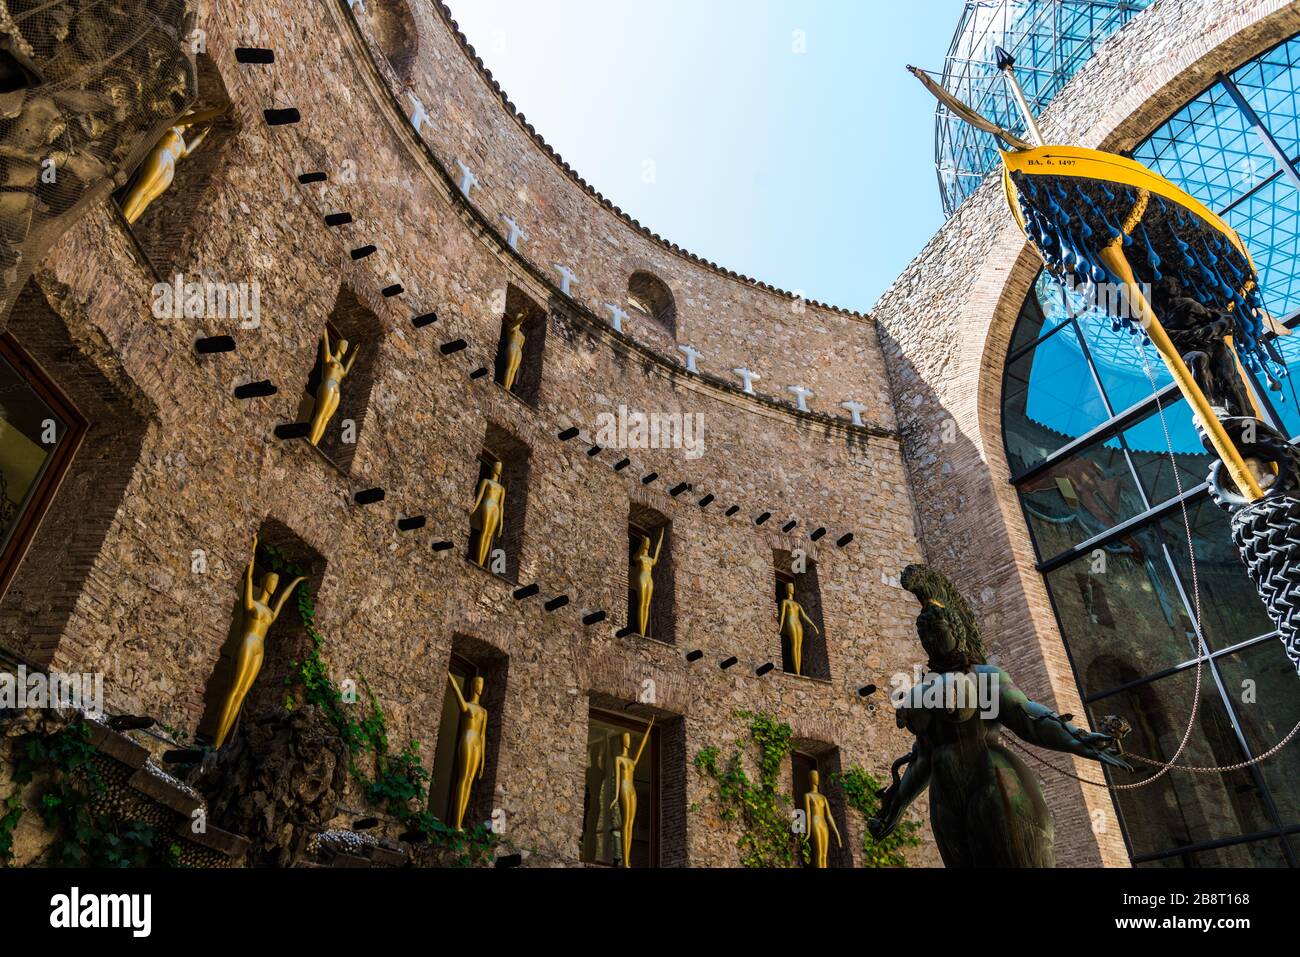 Figueres, Spain - August 3, 2019: Inside of Gala Salvador Dali Foundation museum Stock Photo